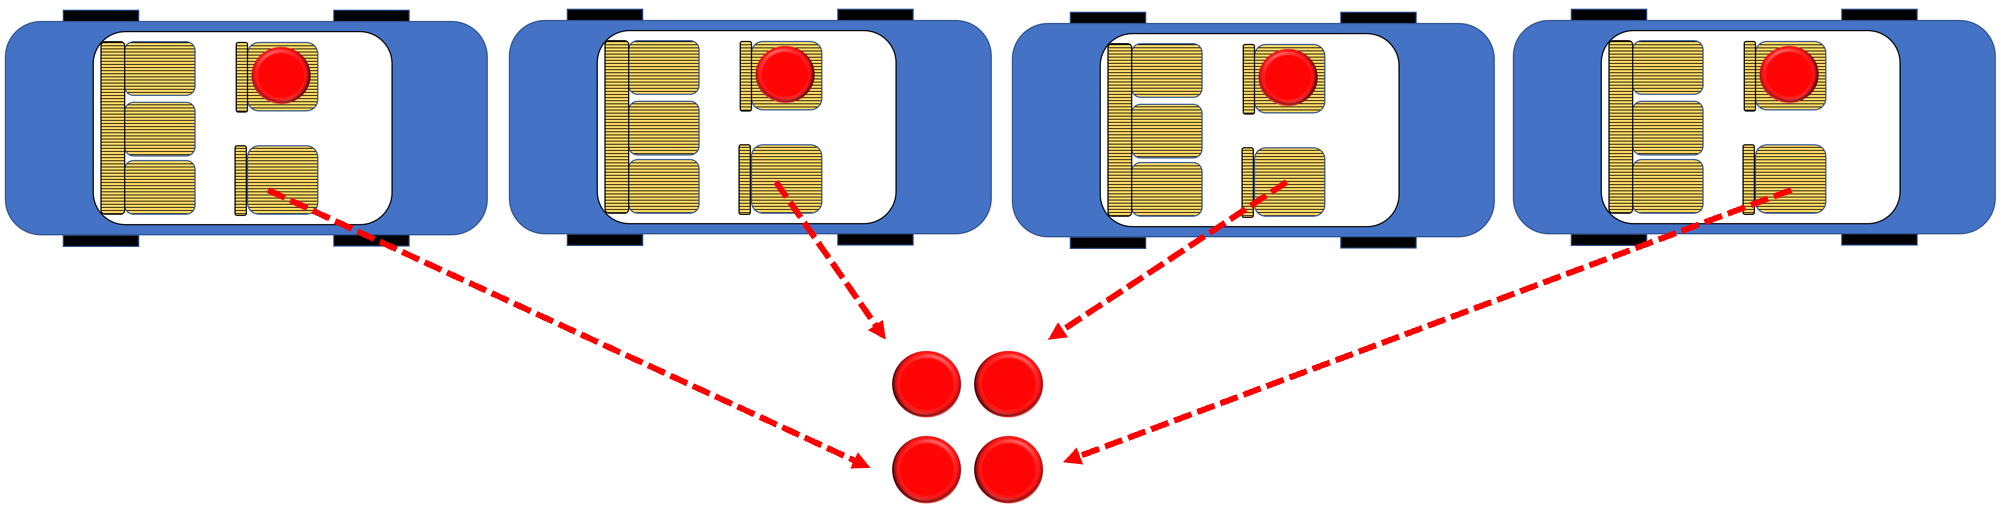 Image of four cars. Each holds one person. Arrows indicate that an additional person has been moved from each car to make a new group of four people.